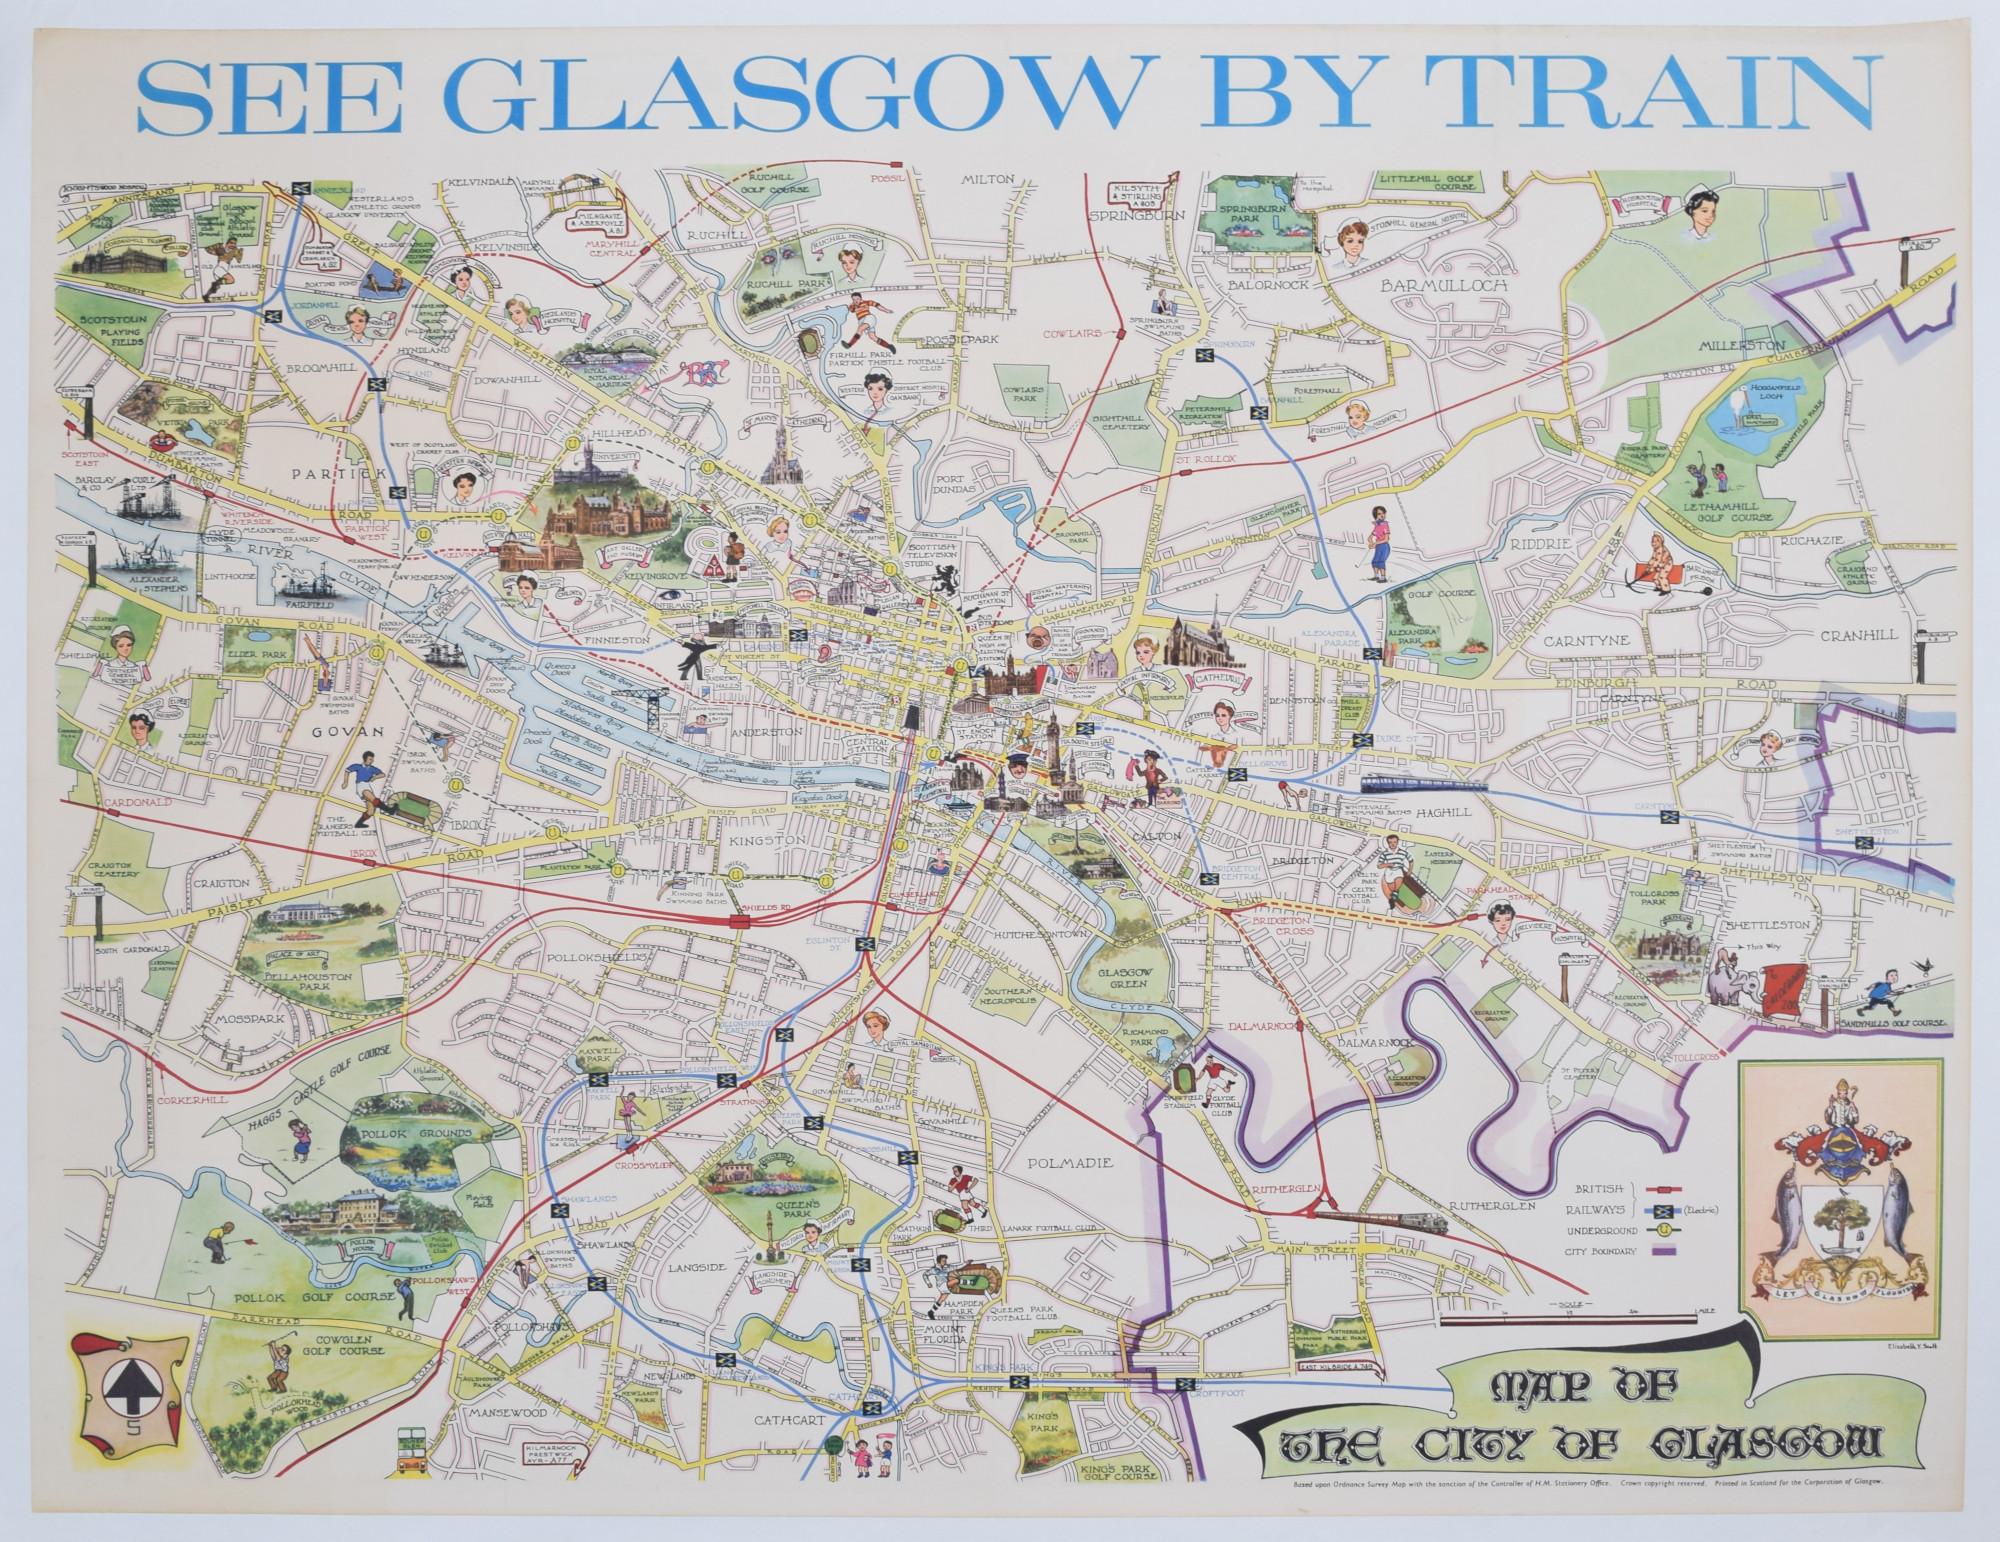 To see our other original vintage posters, scroll down to "More from this Seller" and below it click on "See all from this Seller" - or send us a message if you cannot find the poster you want.

Elizabeth Scott
See Glasgow by Train
Original vintage